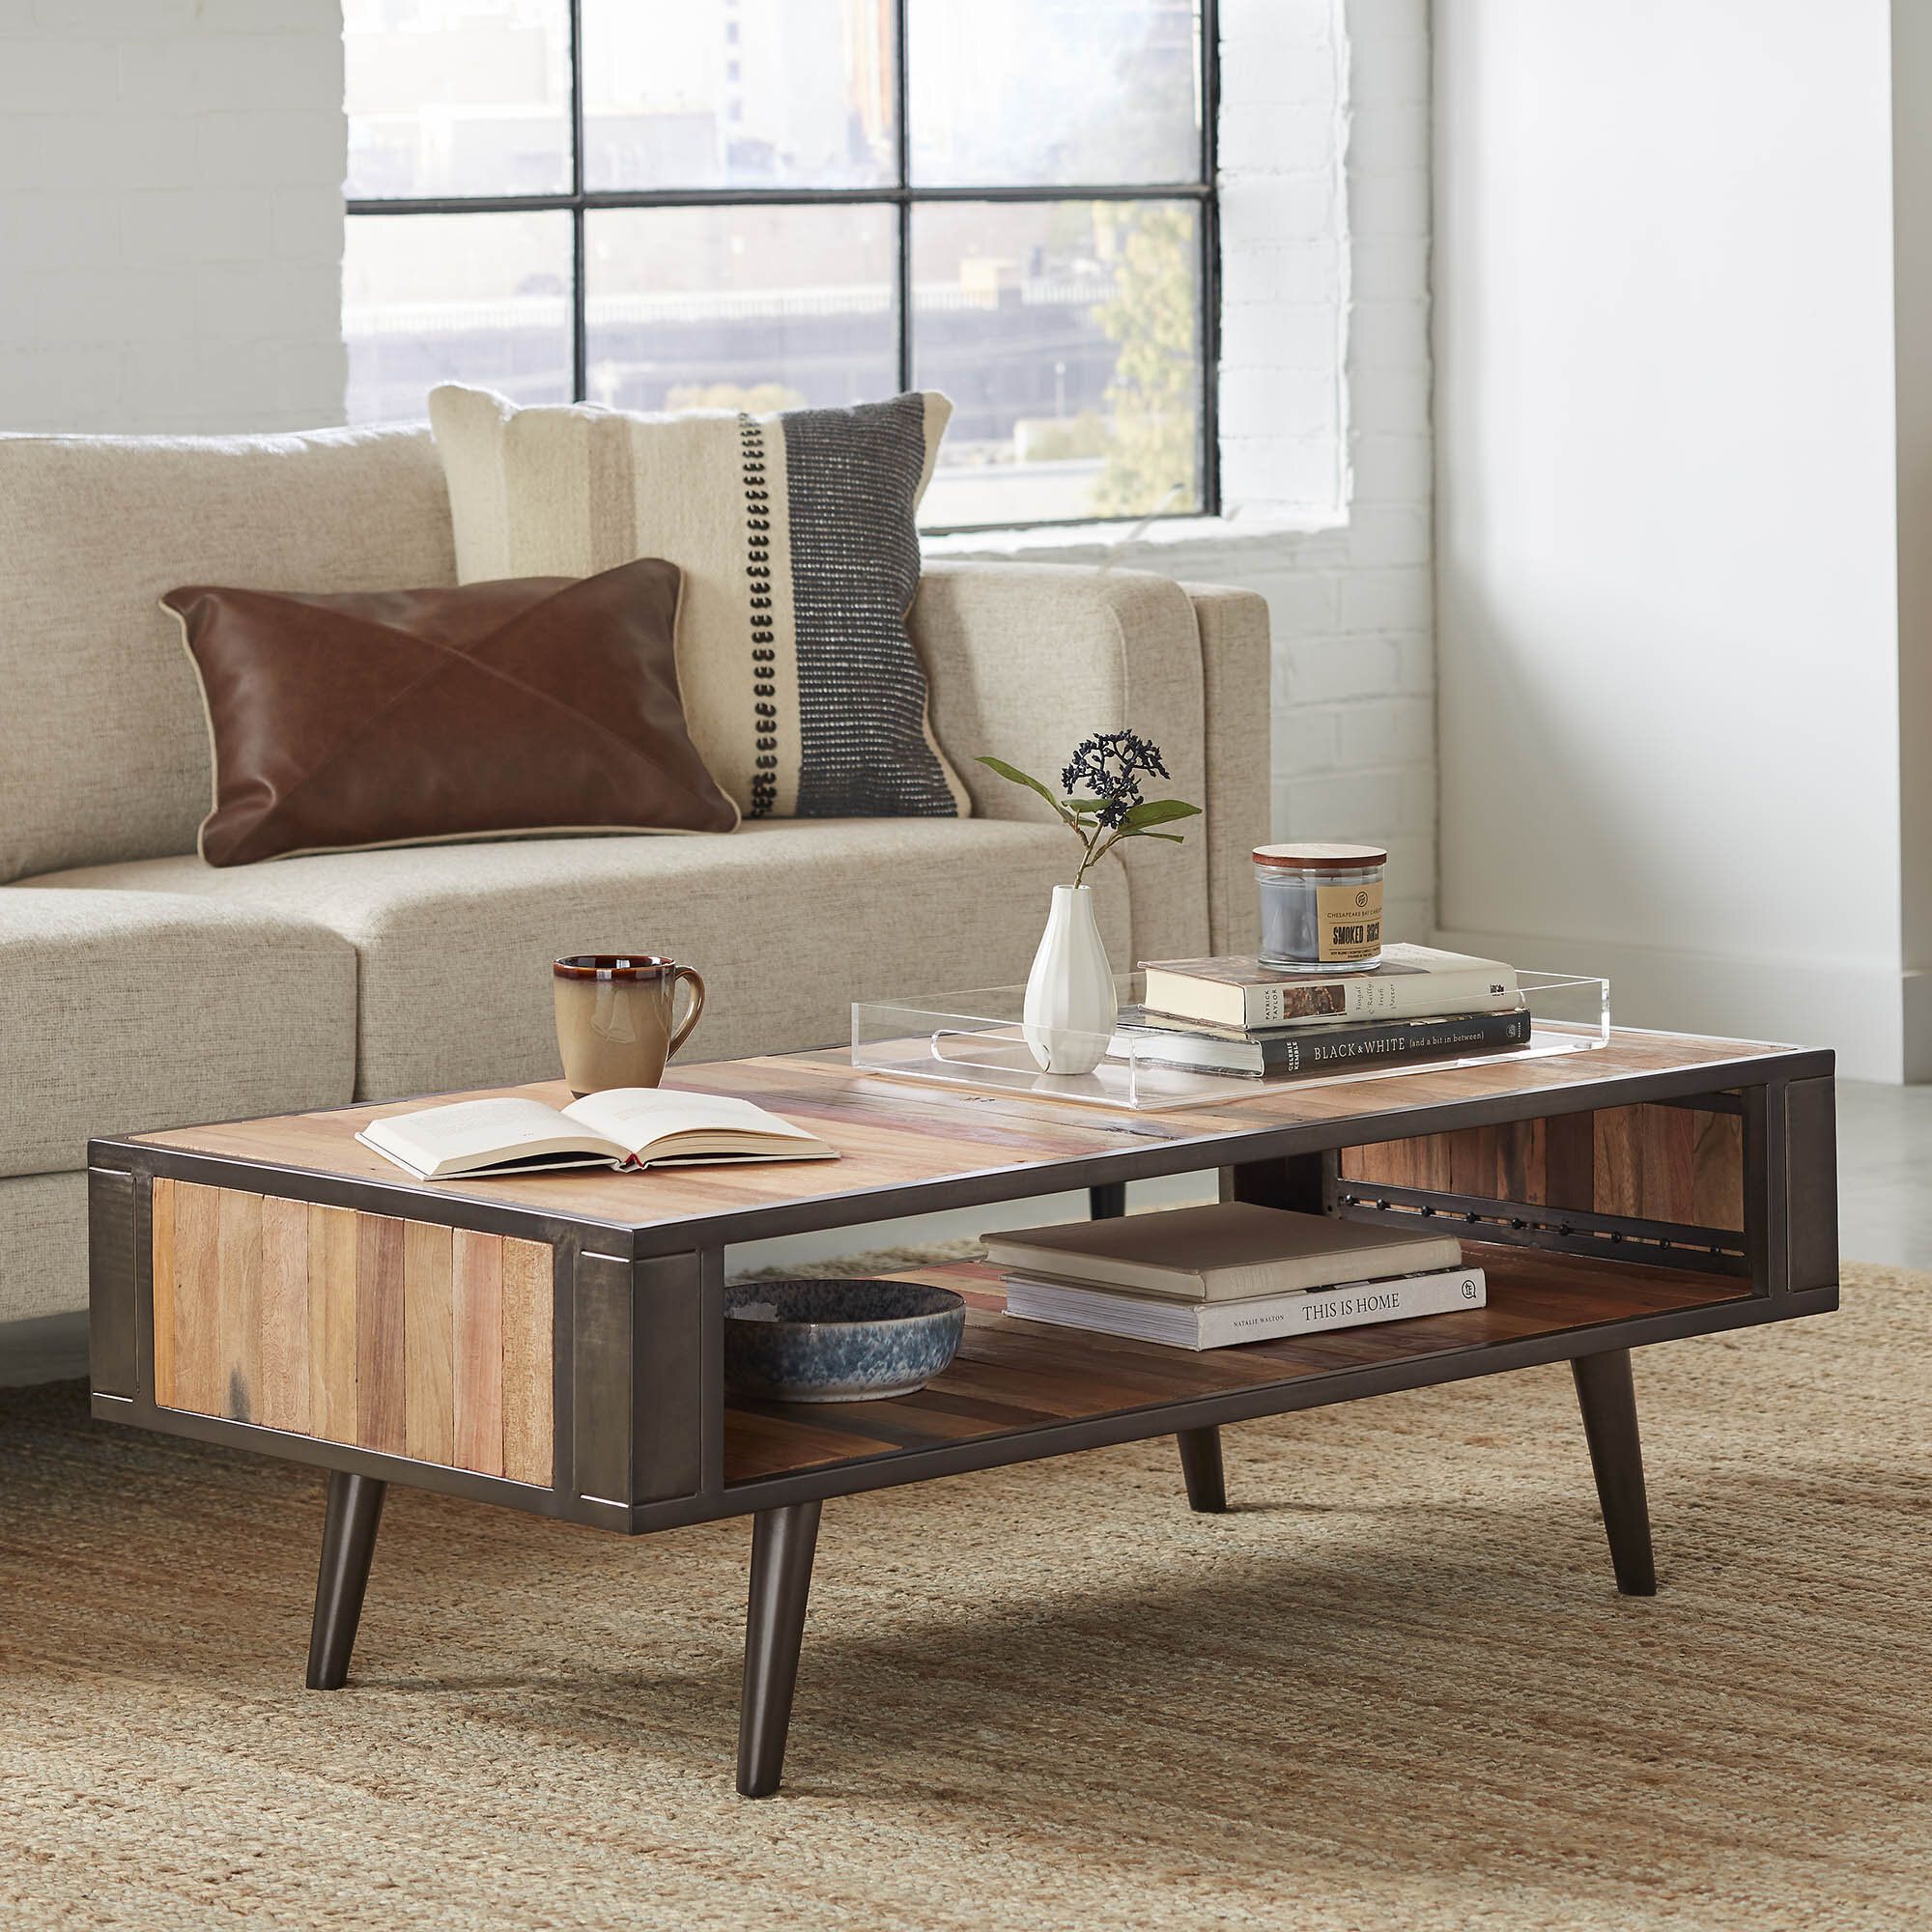 Loon Peak® Curtiss Solid Wood Coffee Table With Storage | Wayfair Within Open Shelf Coffee Tables (View 15 of 20)